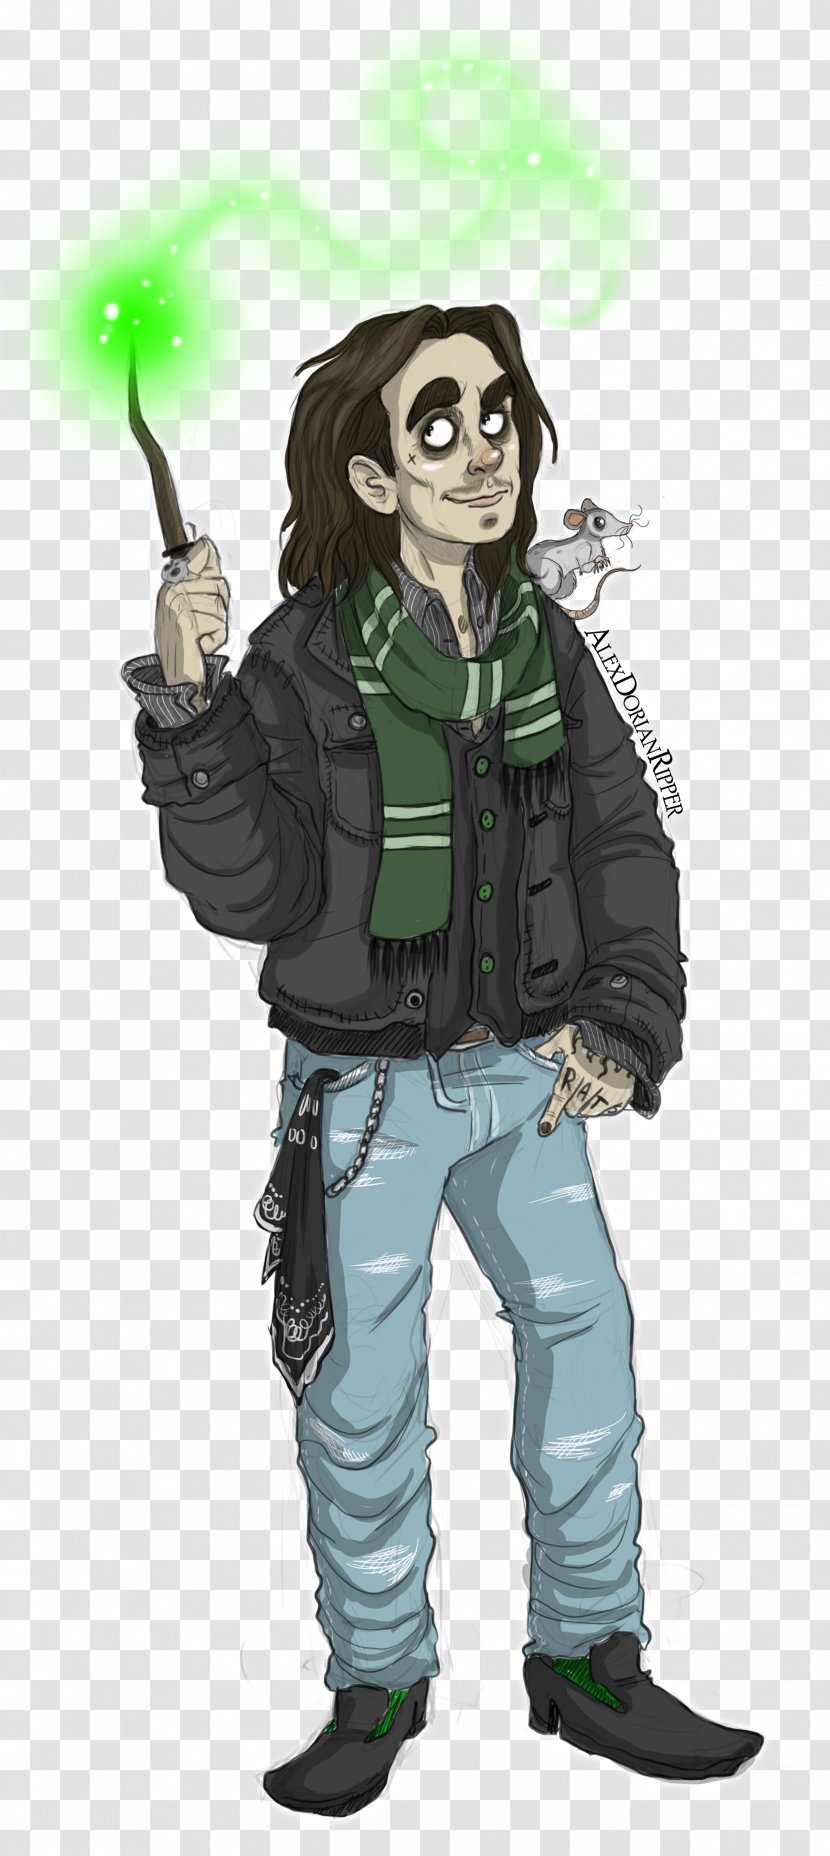 Harry Potter (Literary Series) Professor Severus Snape Hogwarts School Of Witchcraft And Wizardry Fan Art - Fictional Character - Prince Darkness Alice Cooper Transparent PNG